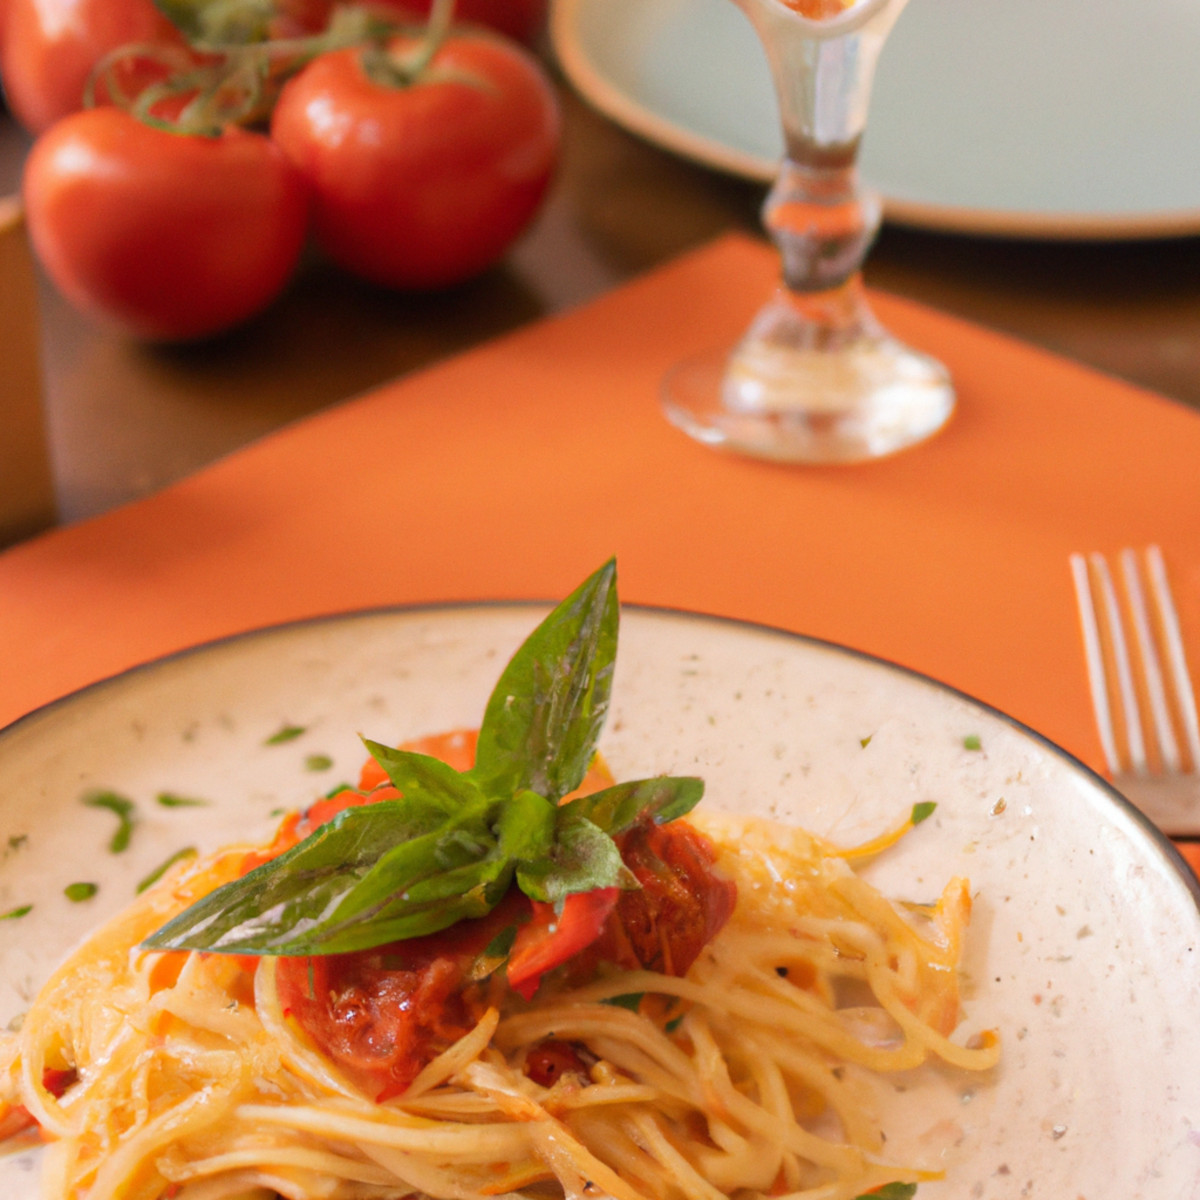 spaghetti with fresh tomatoes and basil